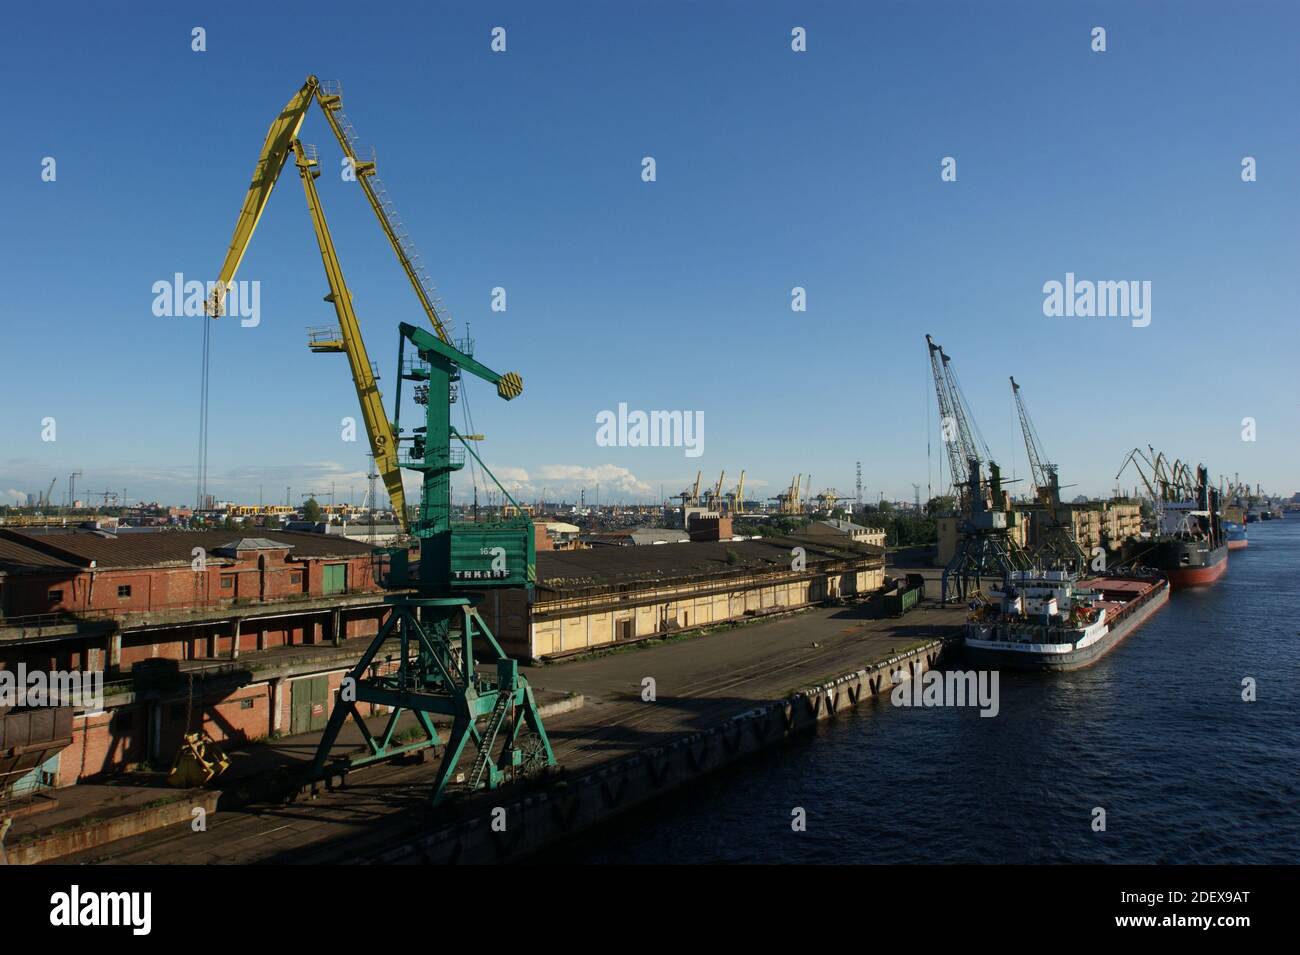 Giants of the great port of St.petersburg span the horizon. Stock Photo